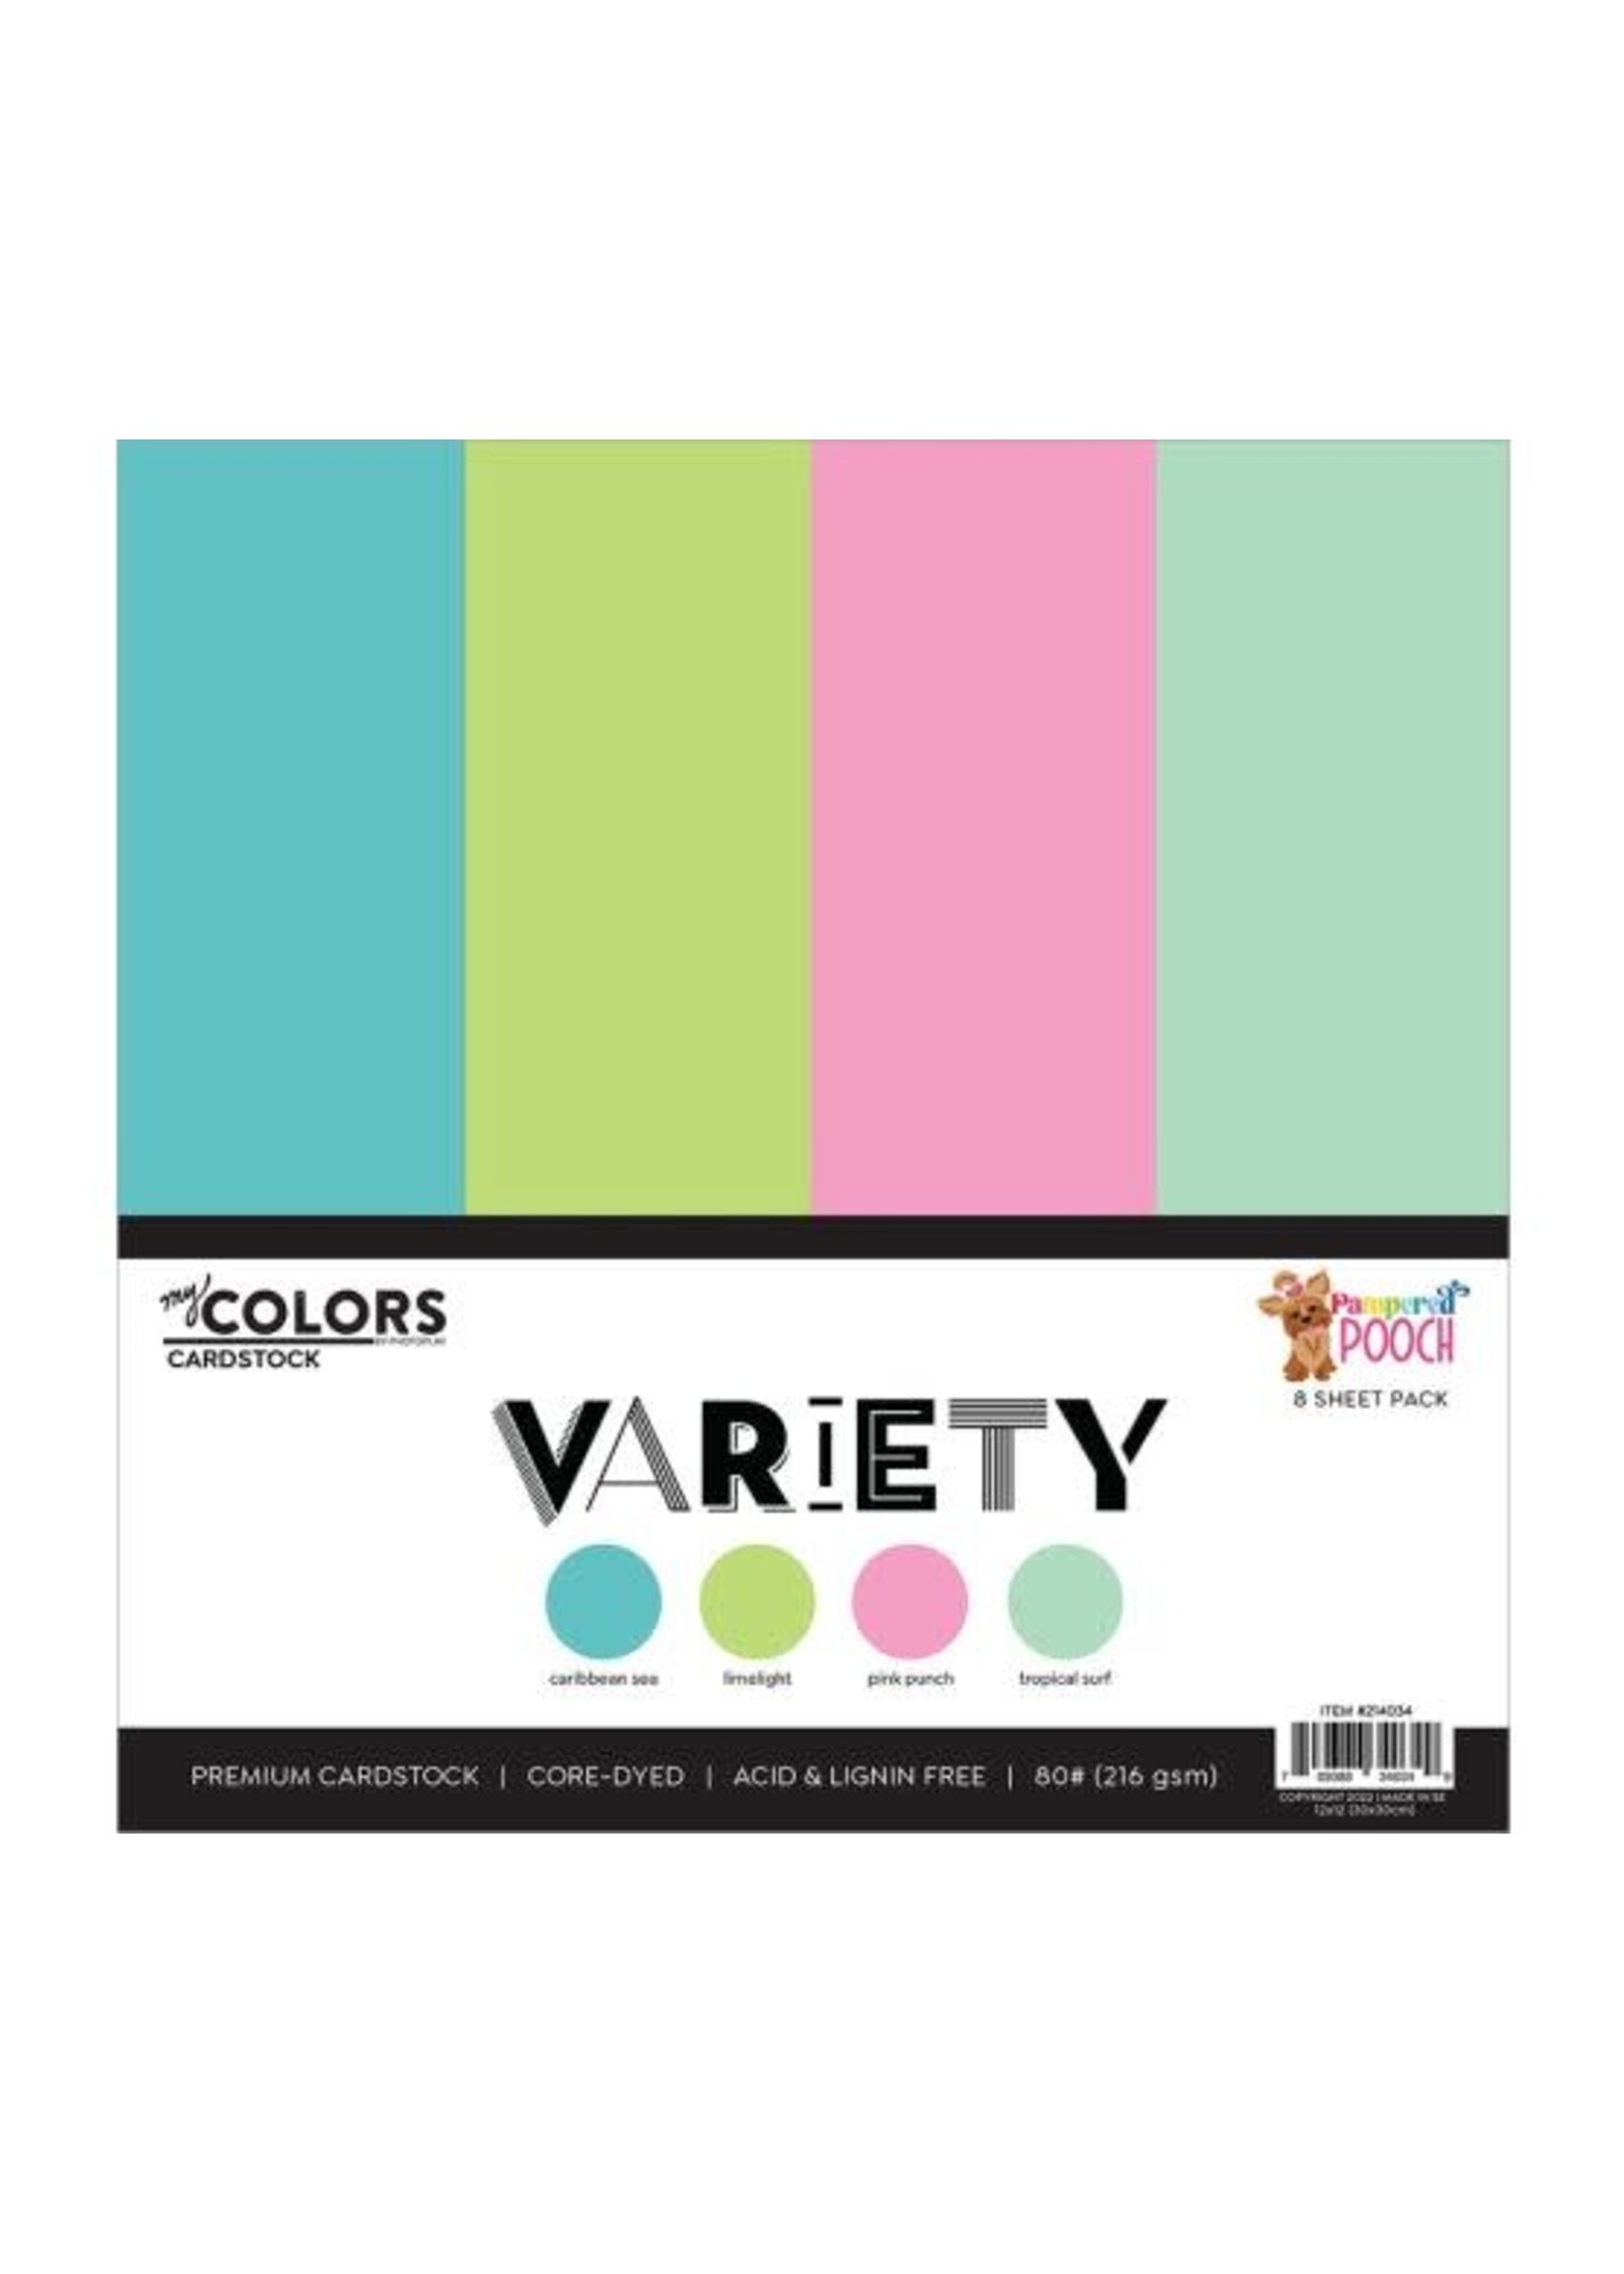 Photoplay Pampered Pooch - Cardstock Variety Pack - 8 sheets